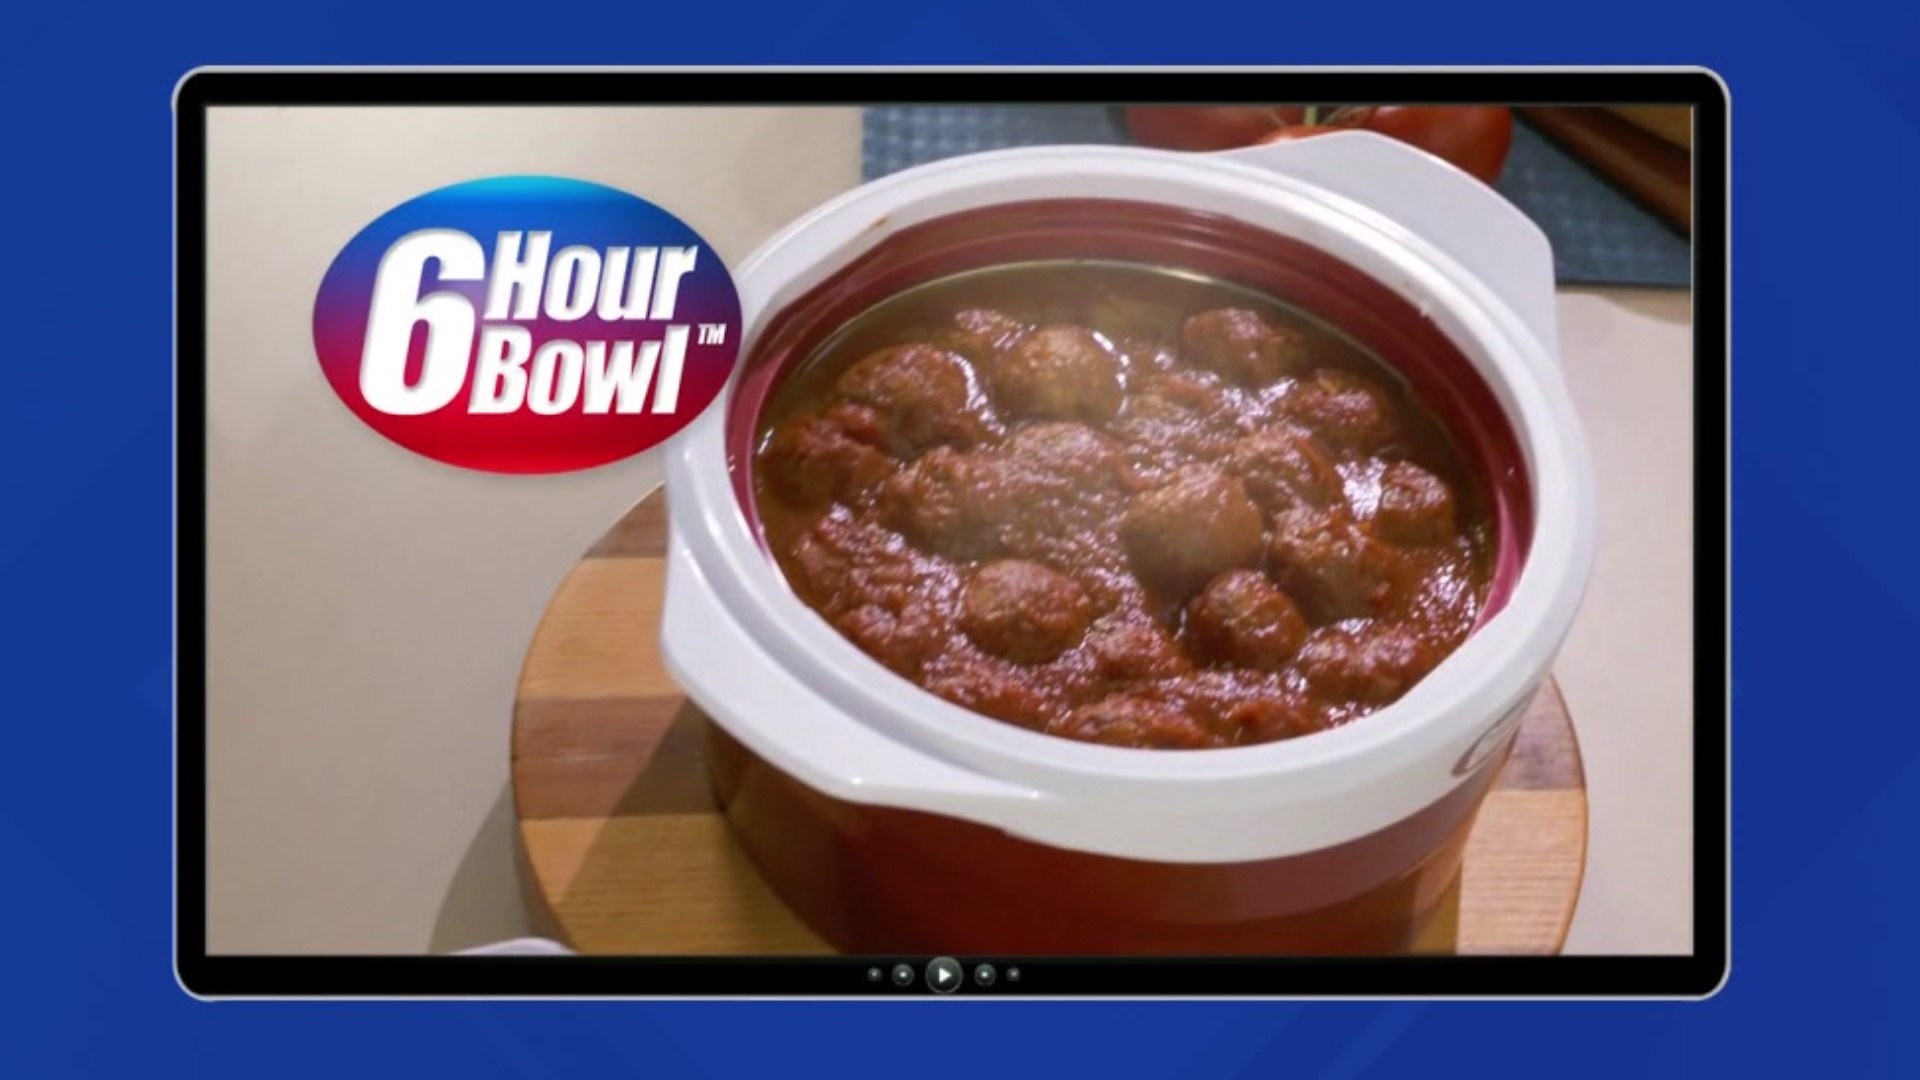 The maker claims the insulated bowl preserves the temperature of your food for up to 6 hours.